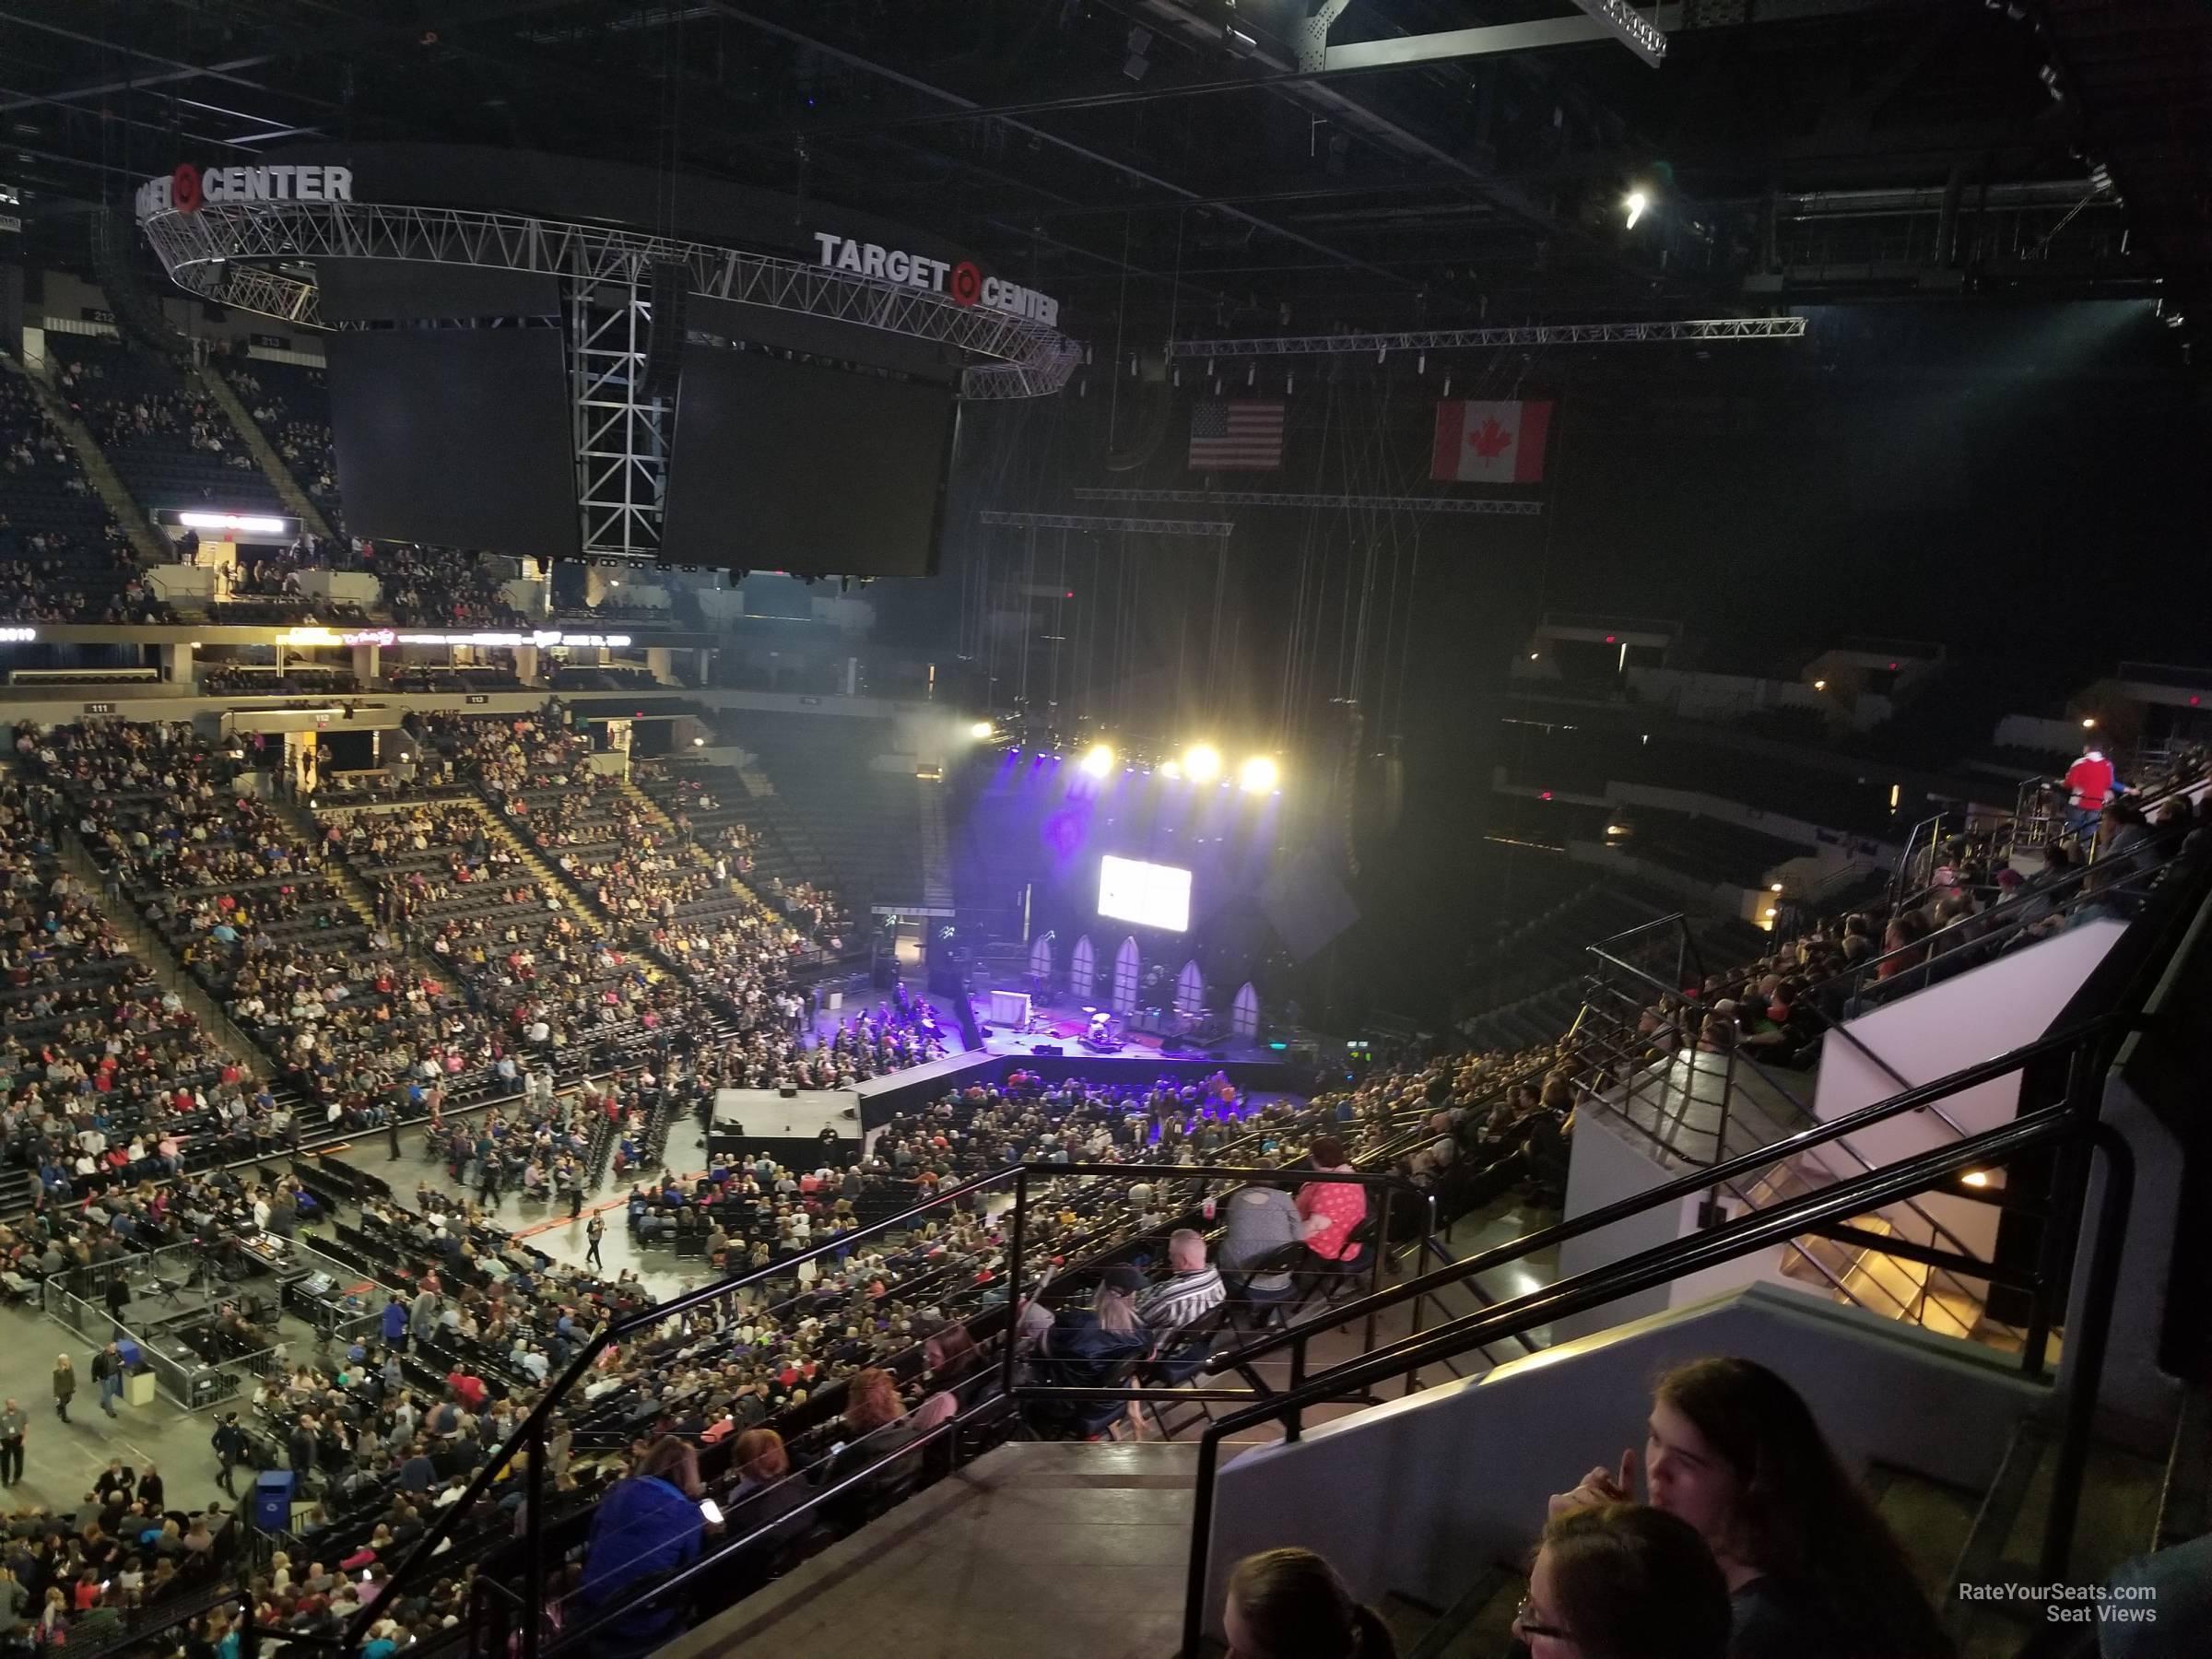 Target Center Section 235 Concert Seating - RateYourSeats.com